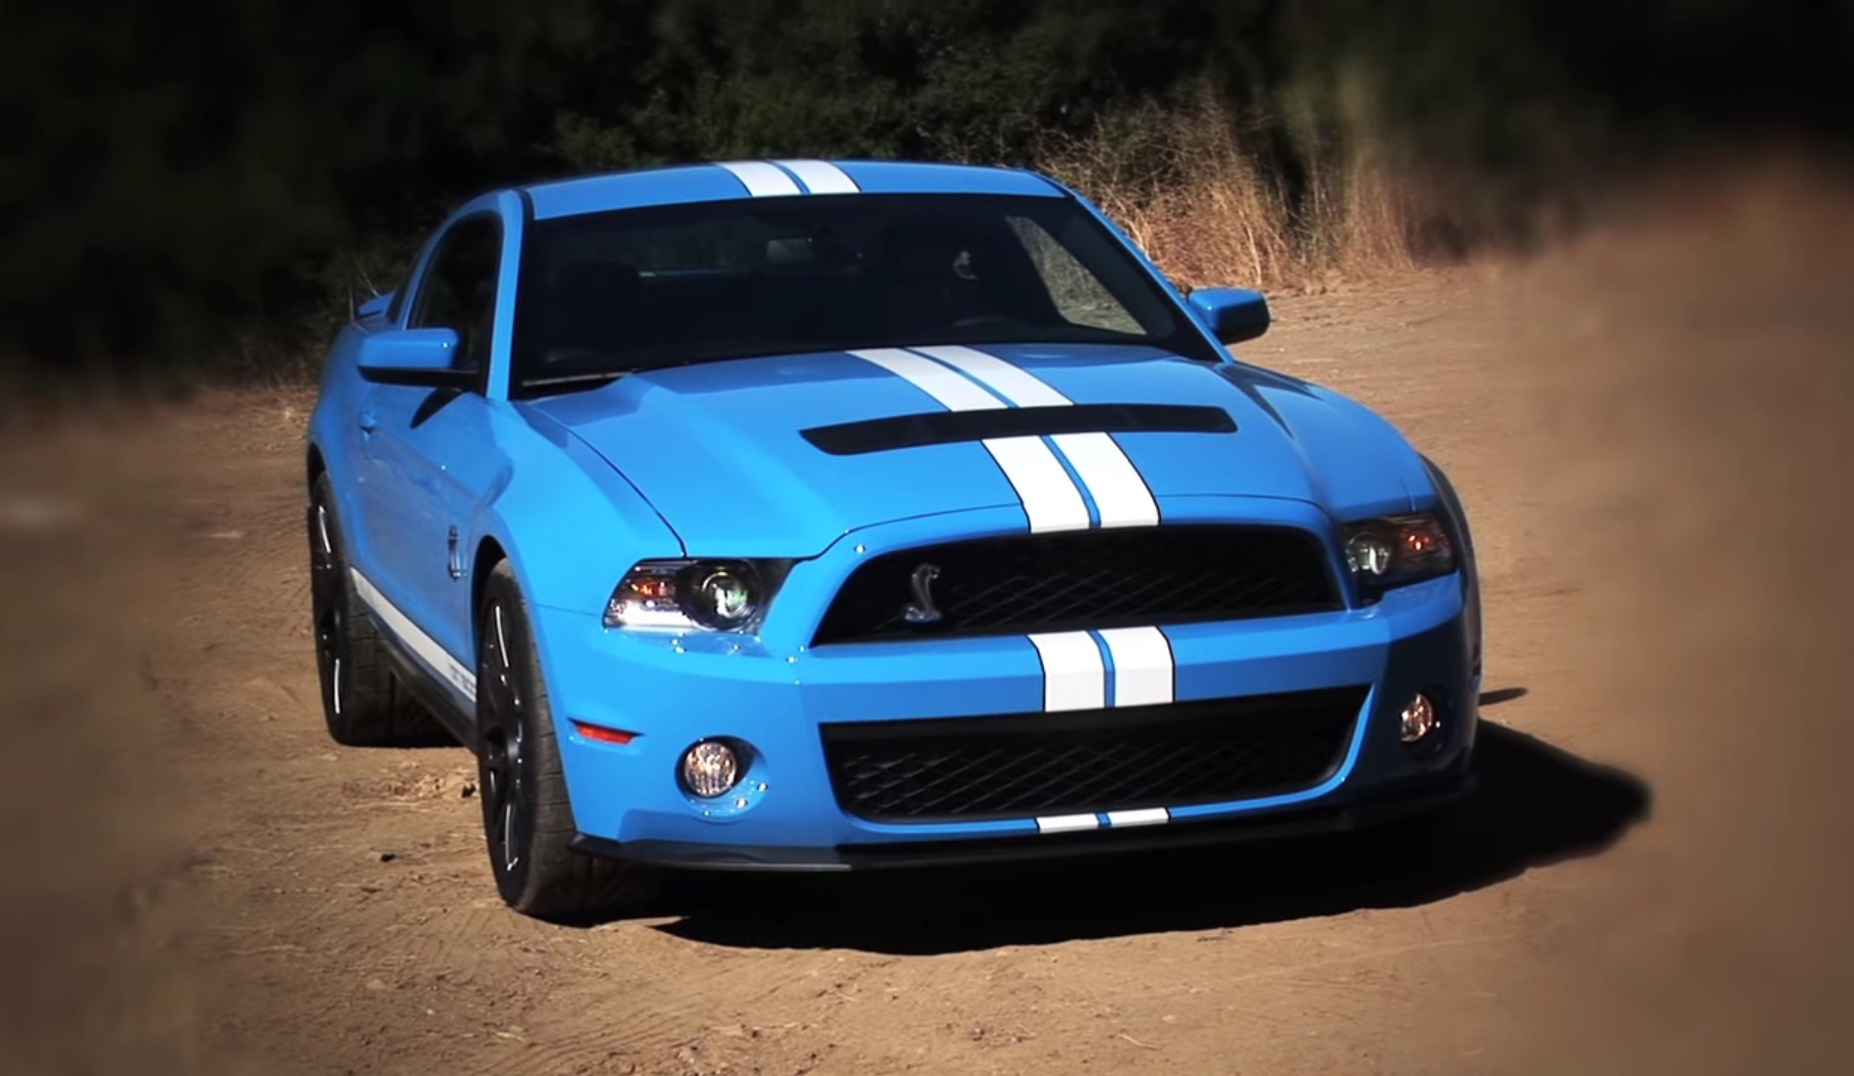 Video: Sights & Sounds From A 2011 Ford Mustang Shelby GT500